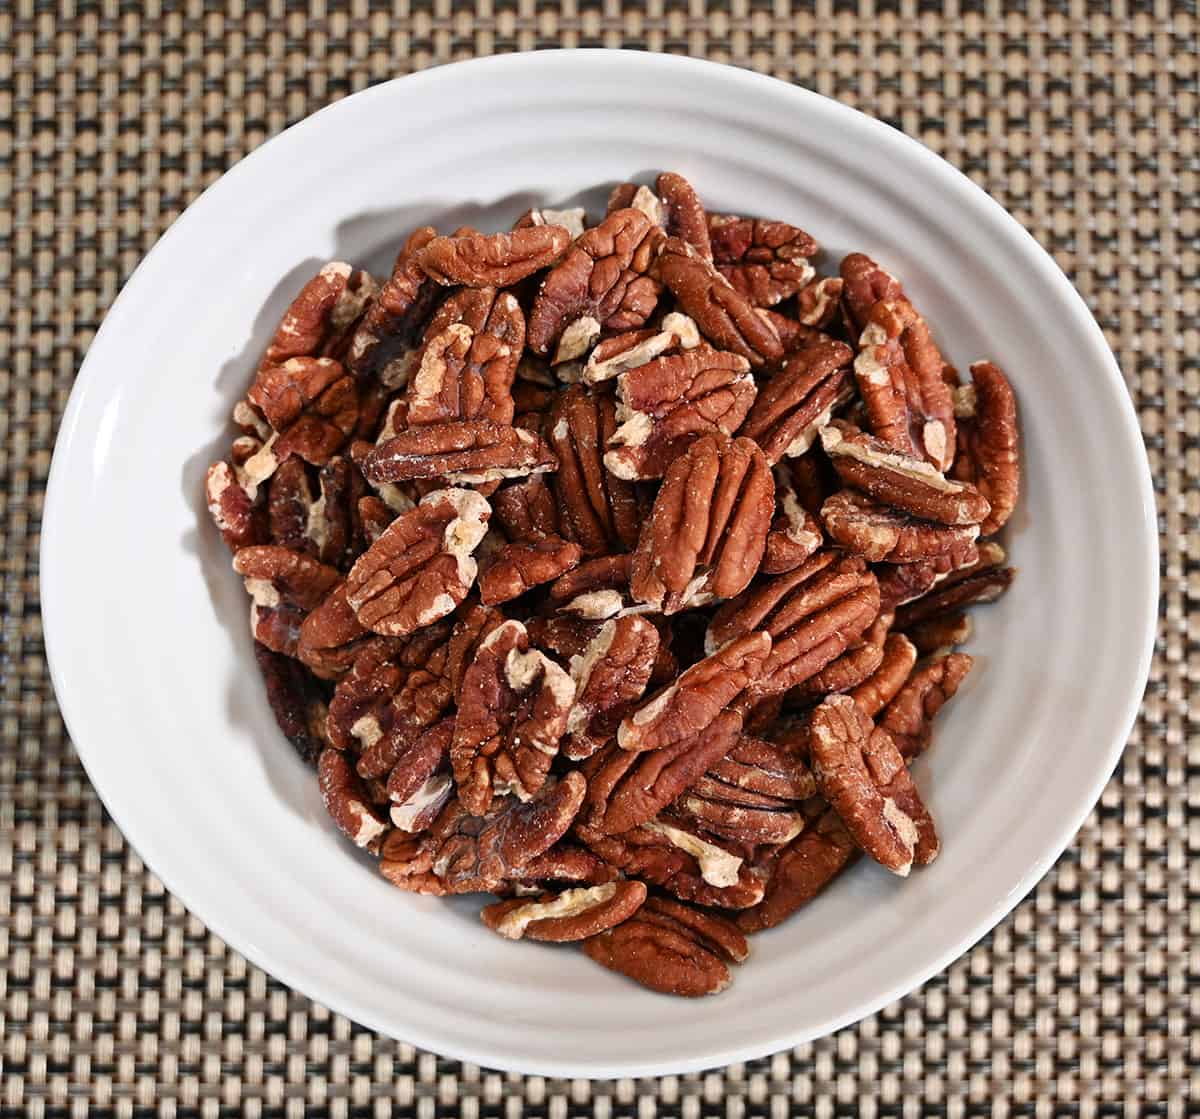 Top down image of a white bowl full of pecans.